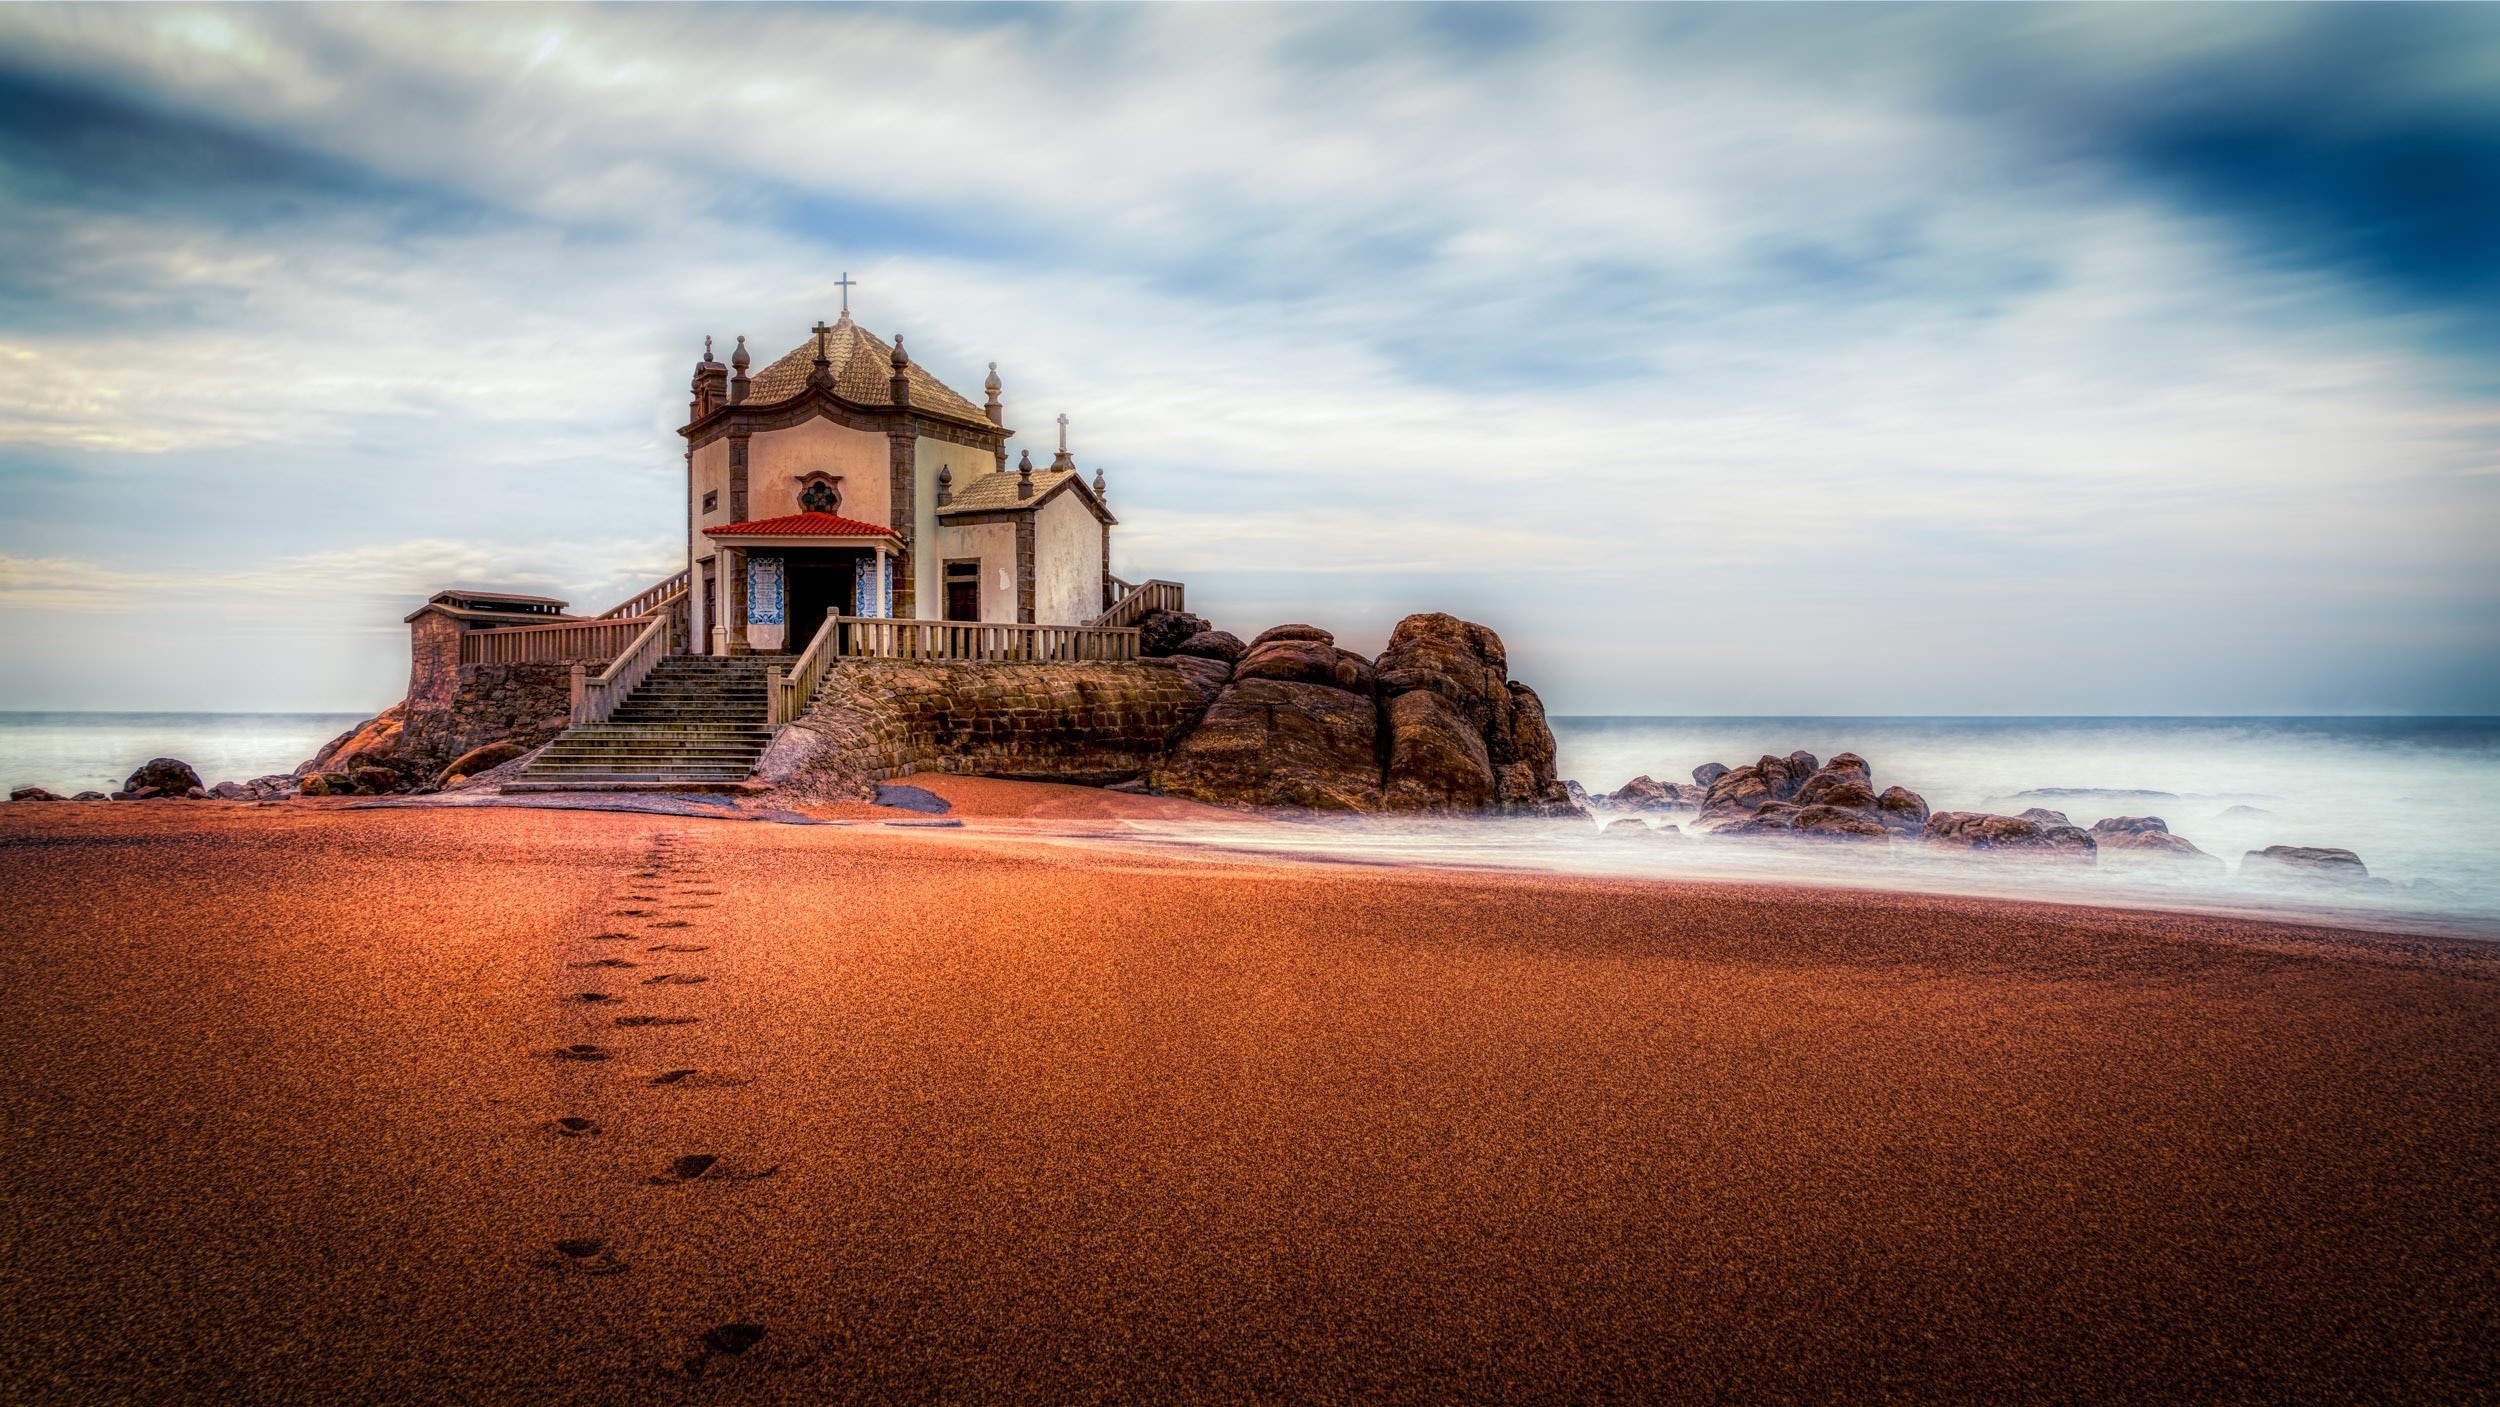 Here is a quick look at the fantastic Chapel of Senhor da Pedra near Porto. This oceanfront chapel built on rocks offering picturesque views of the beach, water & sunsets. I've visited this spot last November after I saw the photo in one of the travel guides. Do you use travel guides when you go for your holidays?